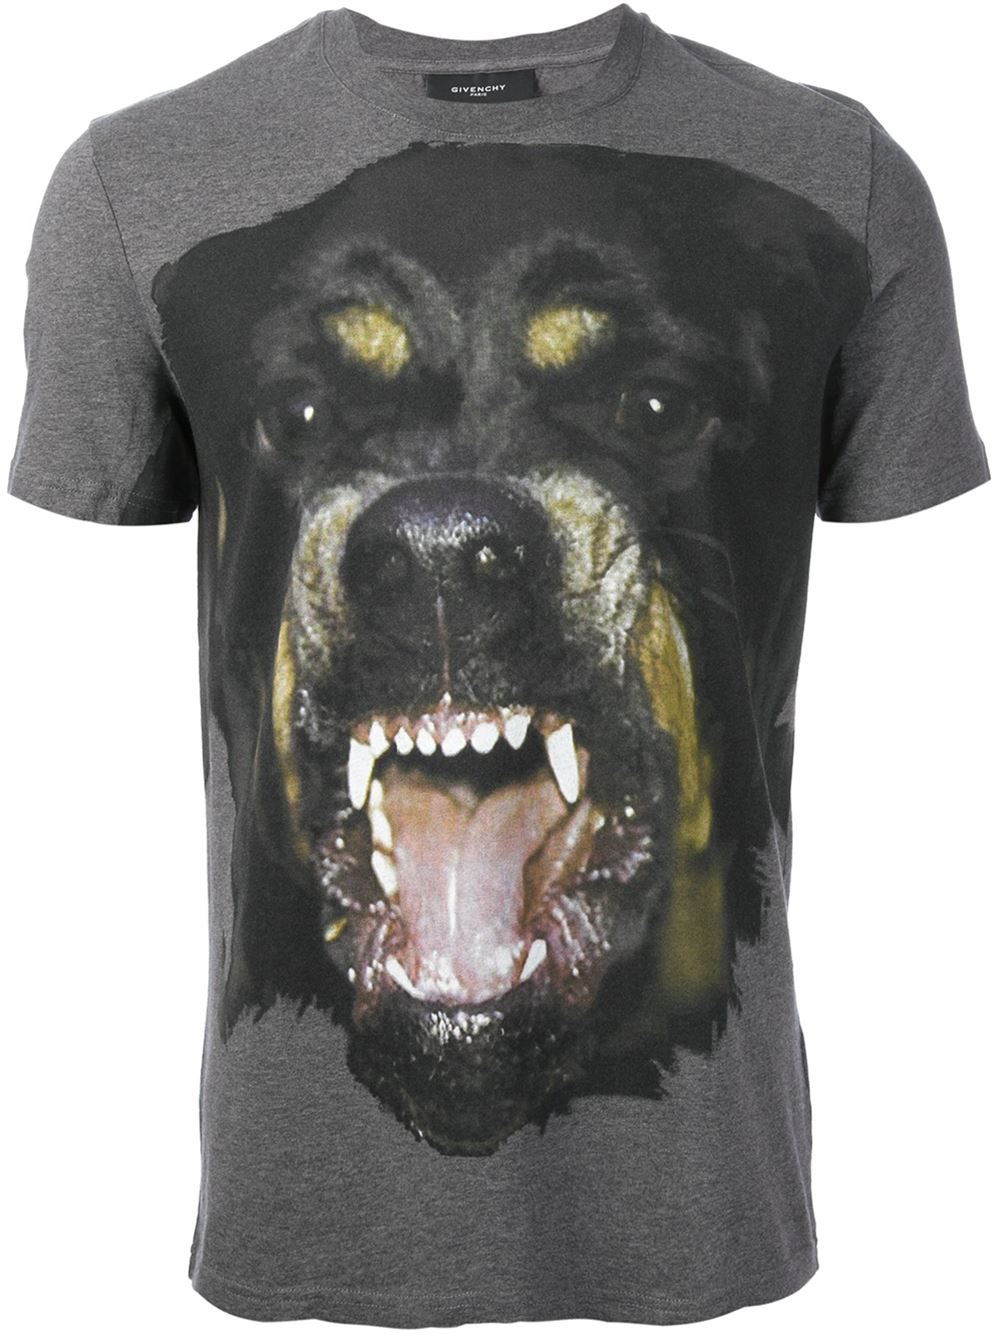 Lyst - Givenchy Rottweiler Tshirt in Gray for Men